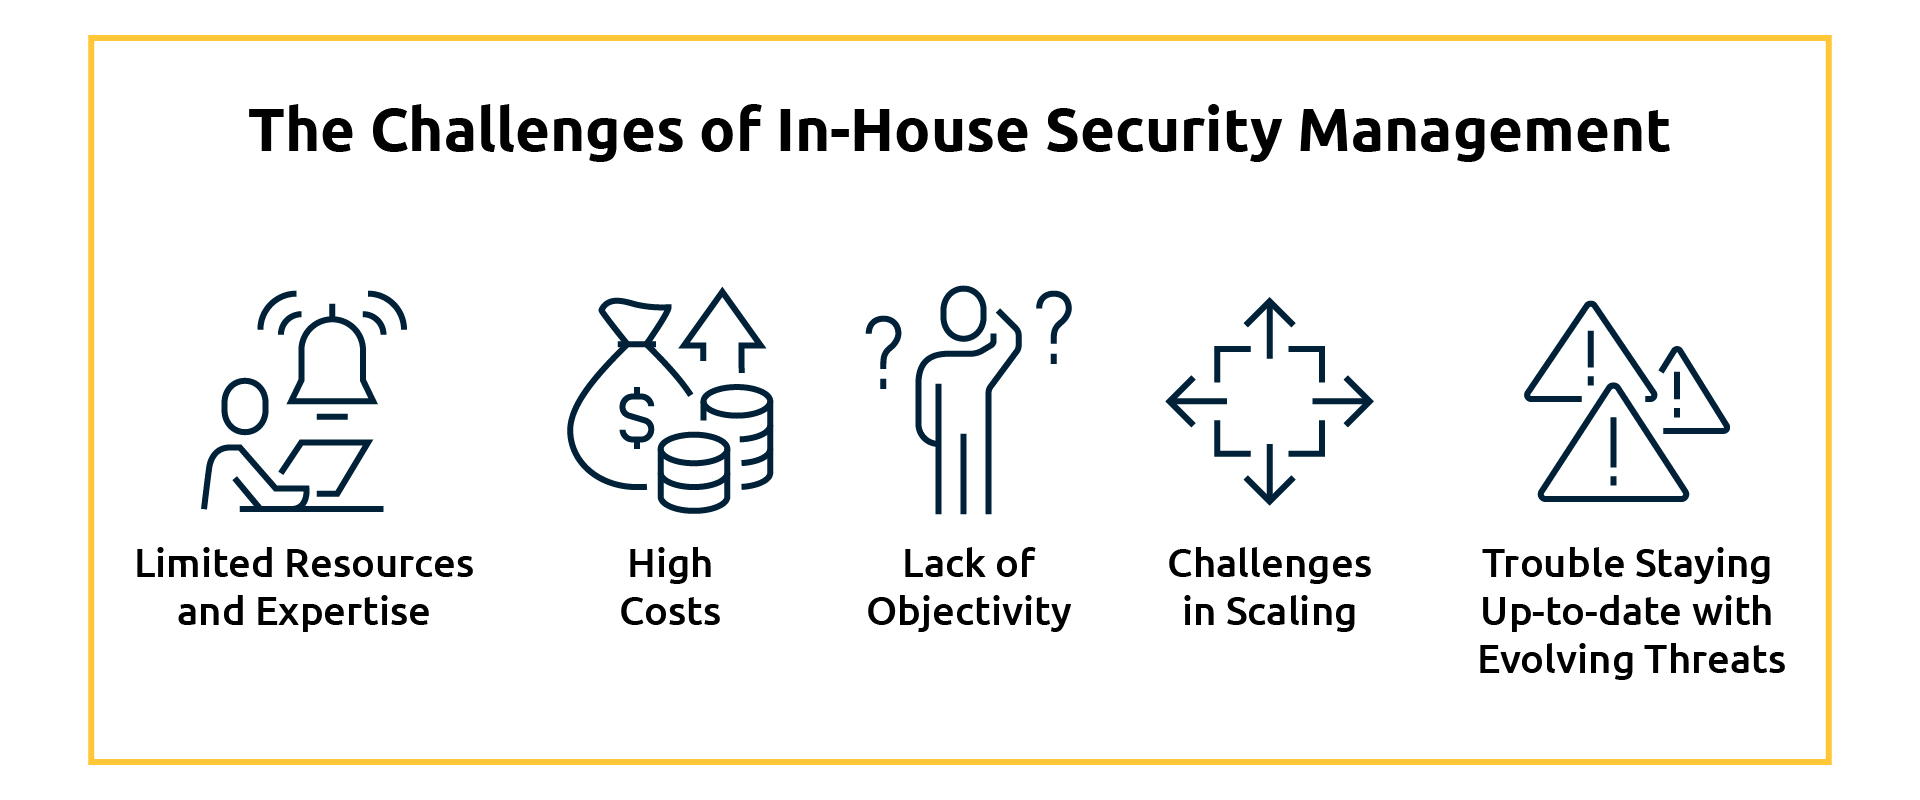 The Challenges of in-house security management